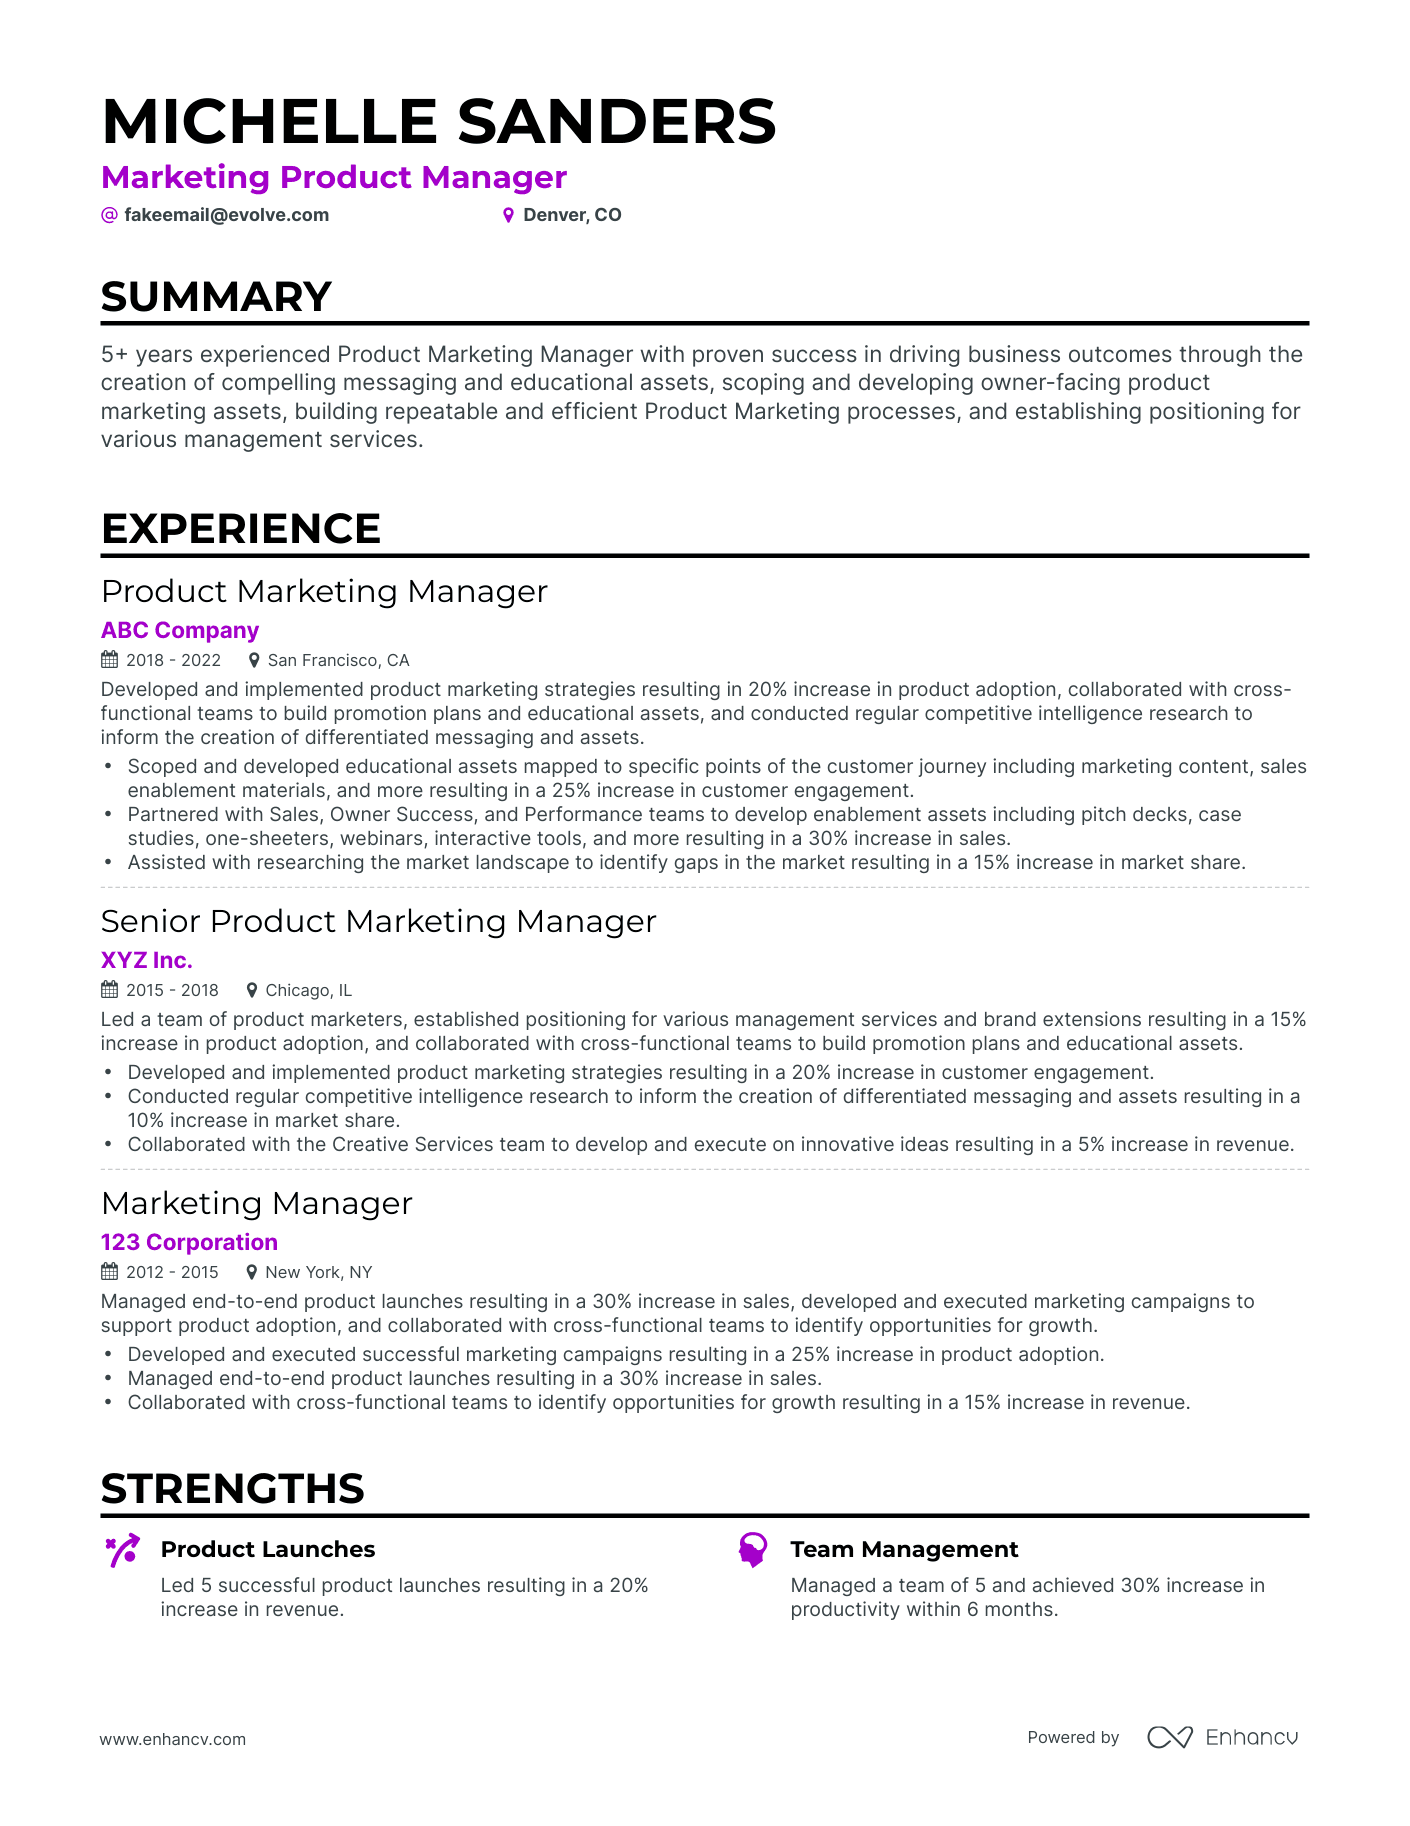 Classic Marketing Product Manager Resume Template